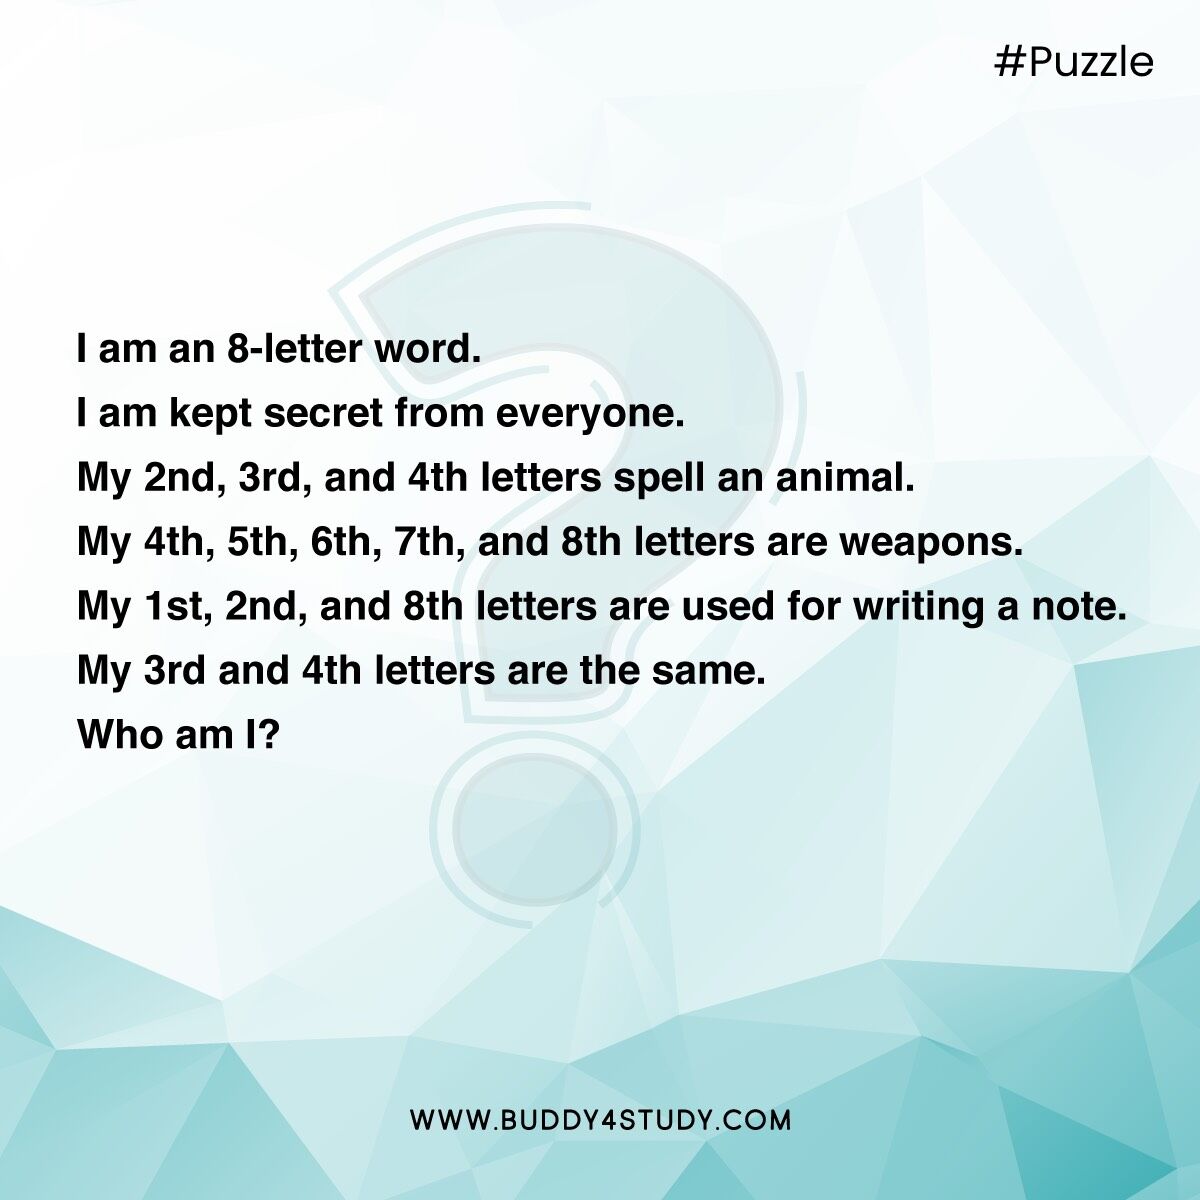 Hint - Someone who is good at cracking code might know the answer.
#Riddles #Puzzle #RiddleChallenge #BrainExercise #Wordplay #WordGame #CracktheCode #BrainTeaser #Buddy4Study